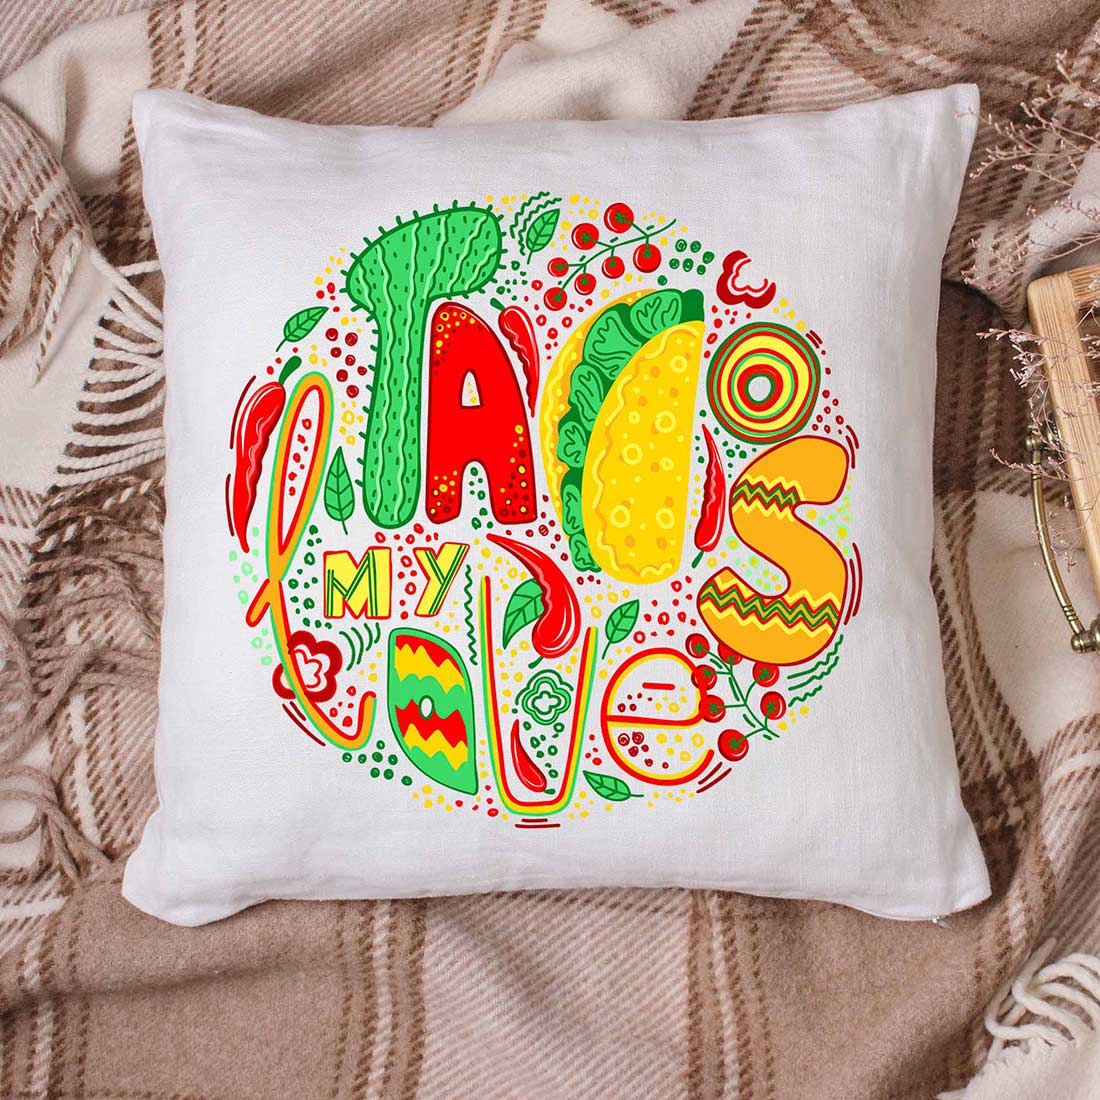 White pillow with multicolor Mexican graphic.